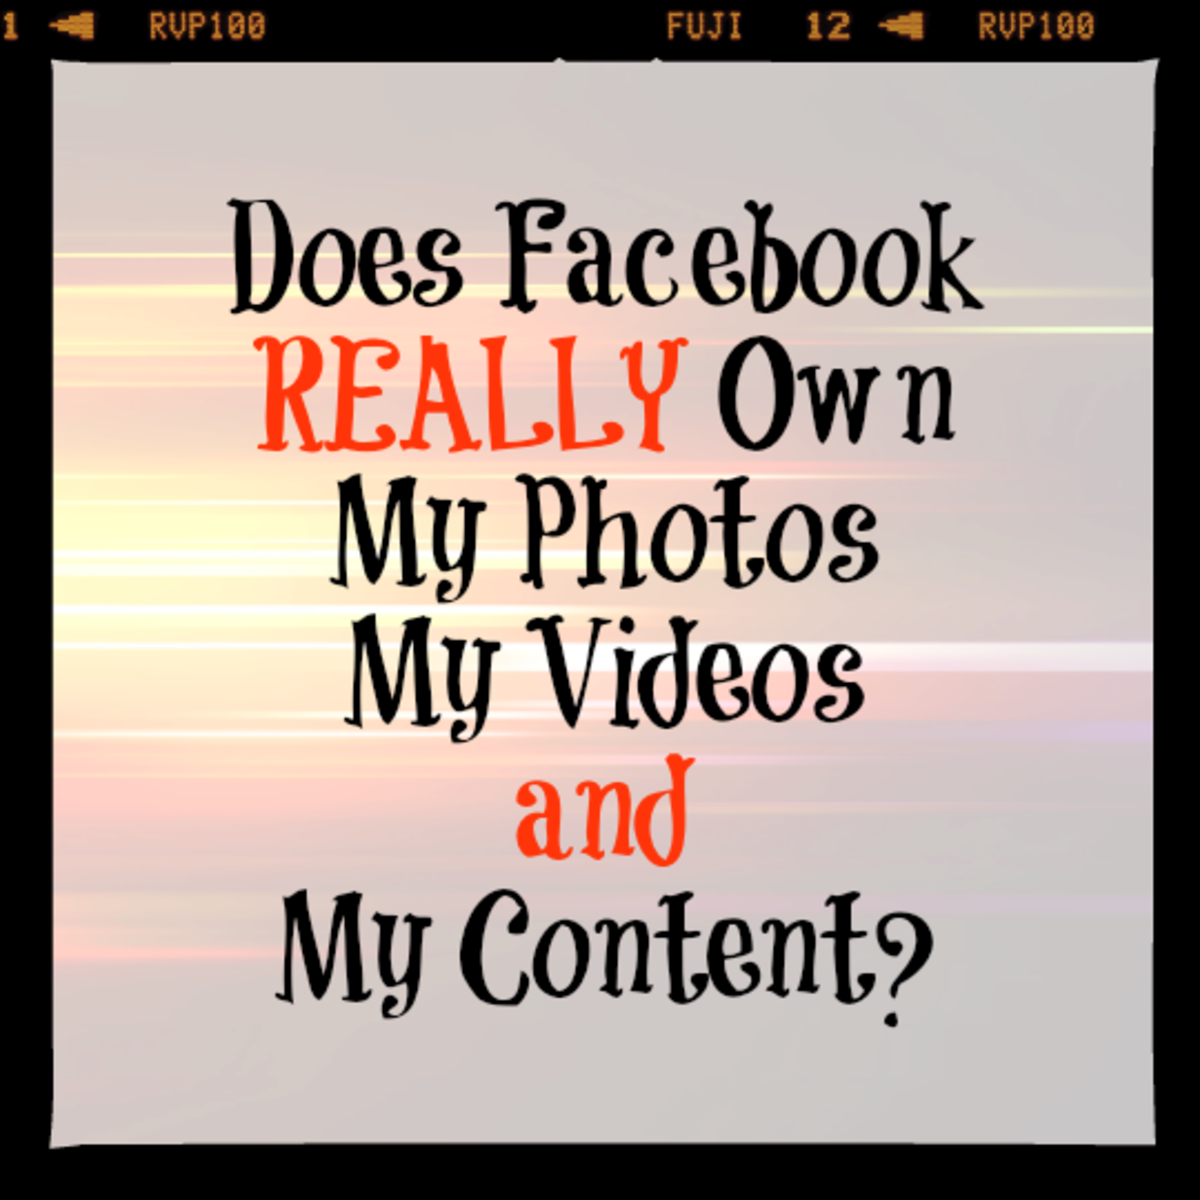 Does Facebook Really Own the Rights to Your Photos, Videos and Content?